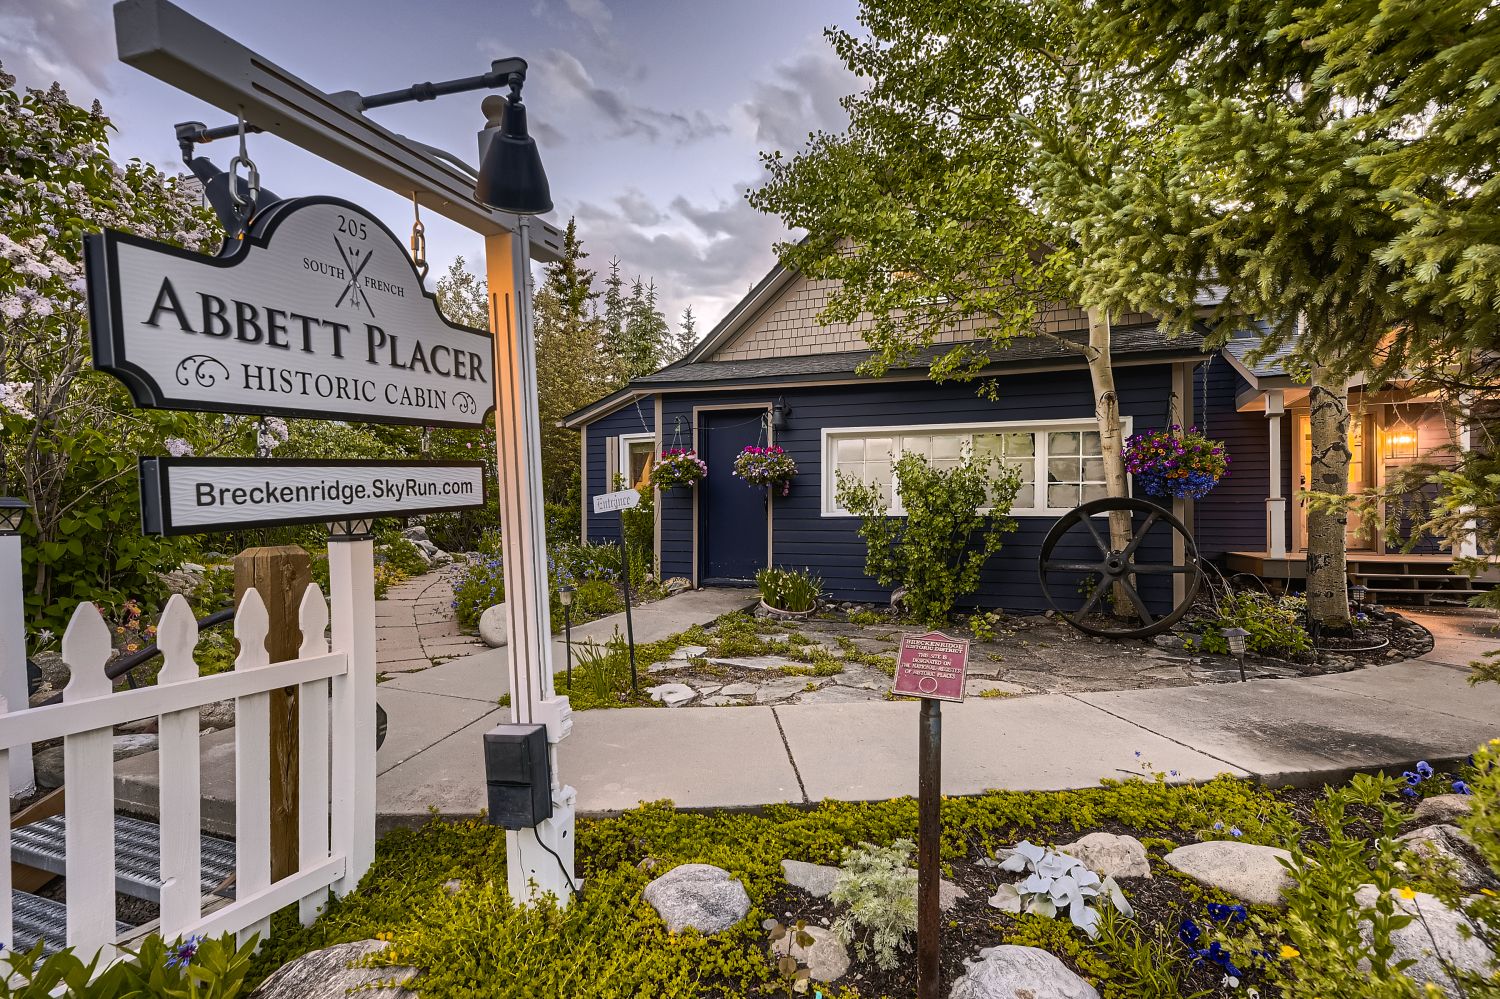 Welcome to the Abbett Placer Historic Cabin - a gem built in 1897 and recently renovated with love! - 